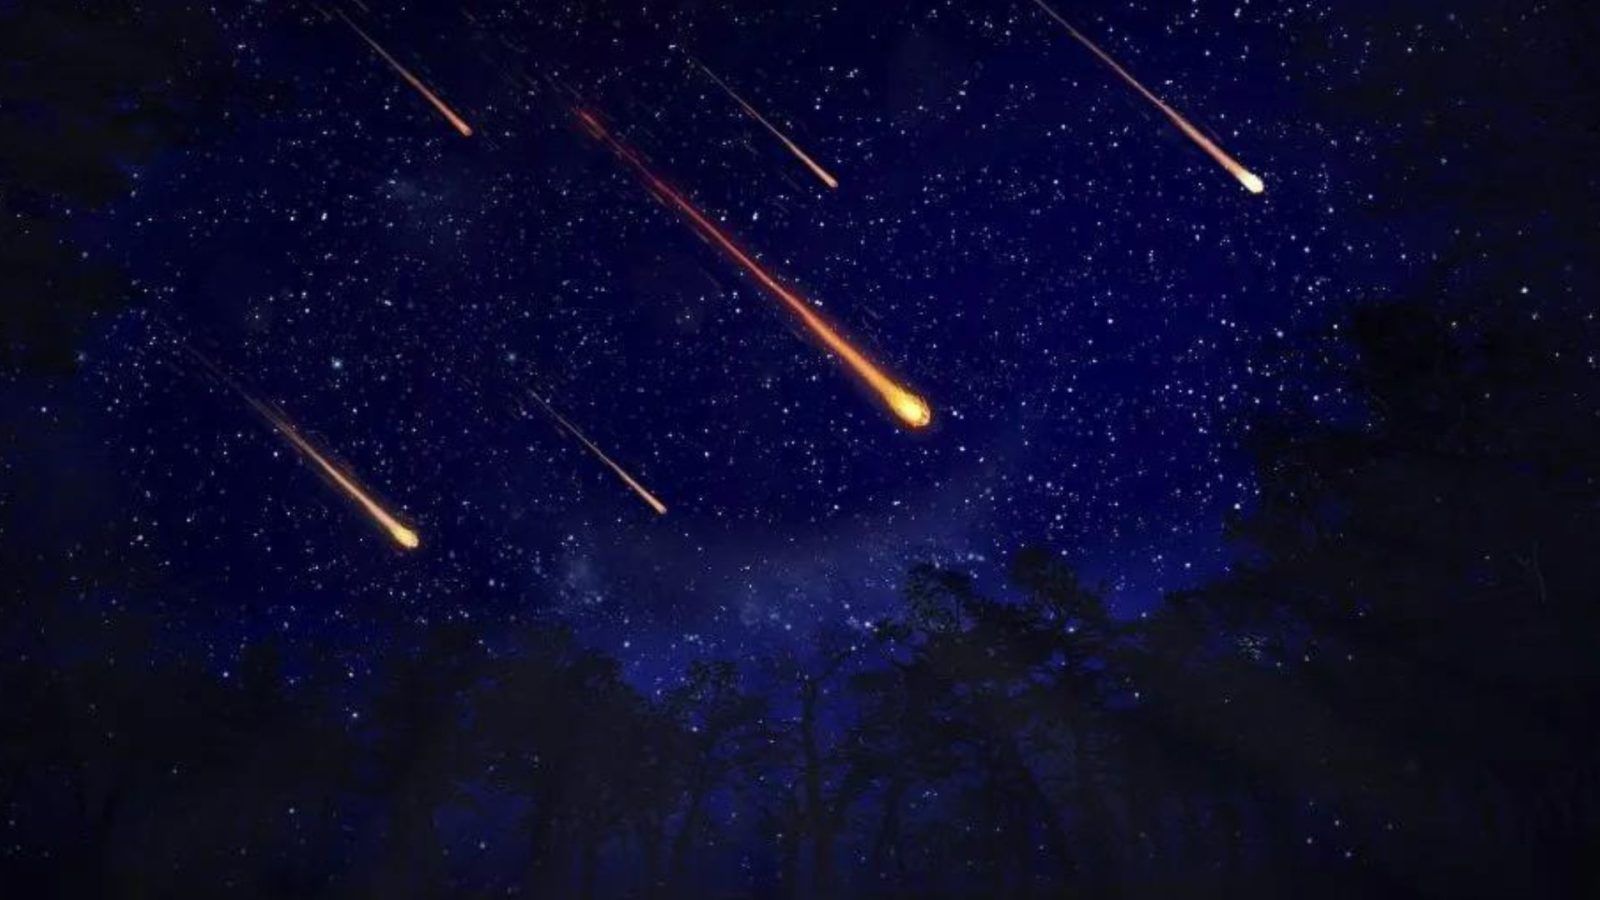 Quadrantids meteor shower Where and how to watch on 3 January 2023